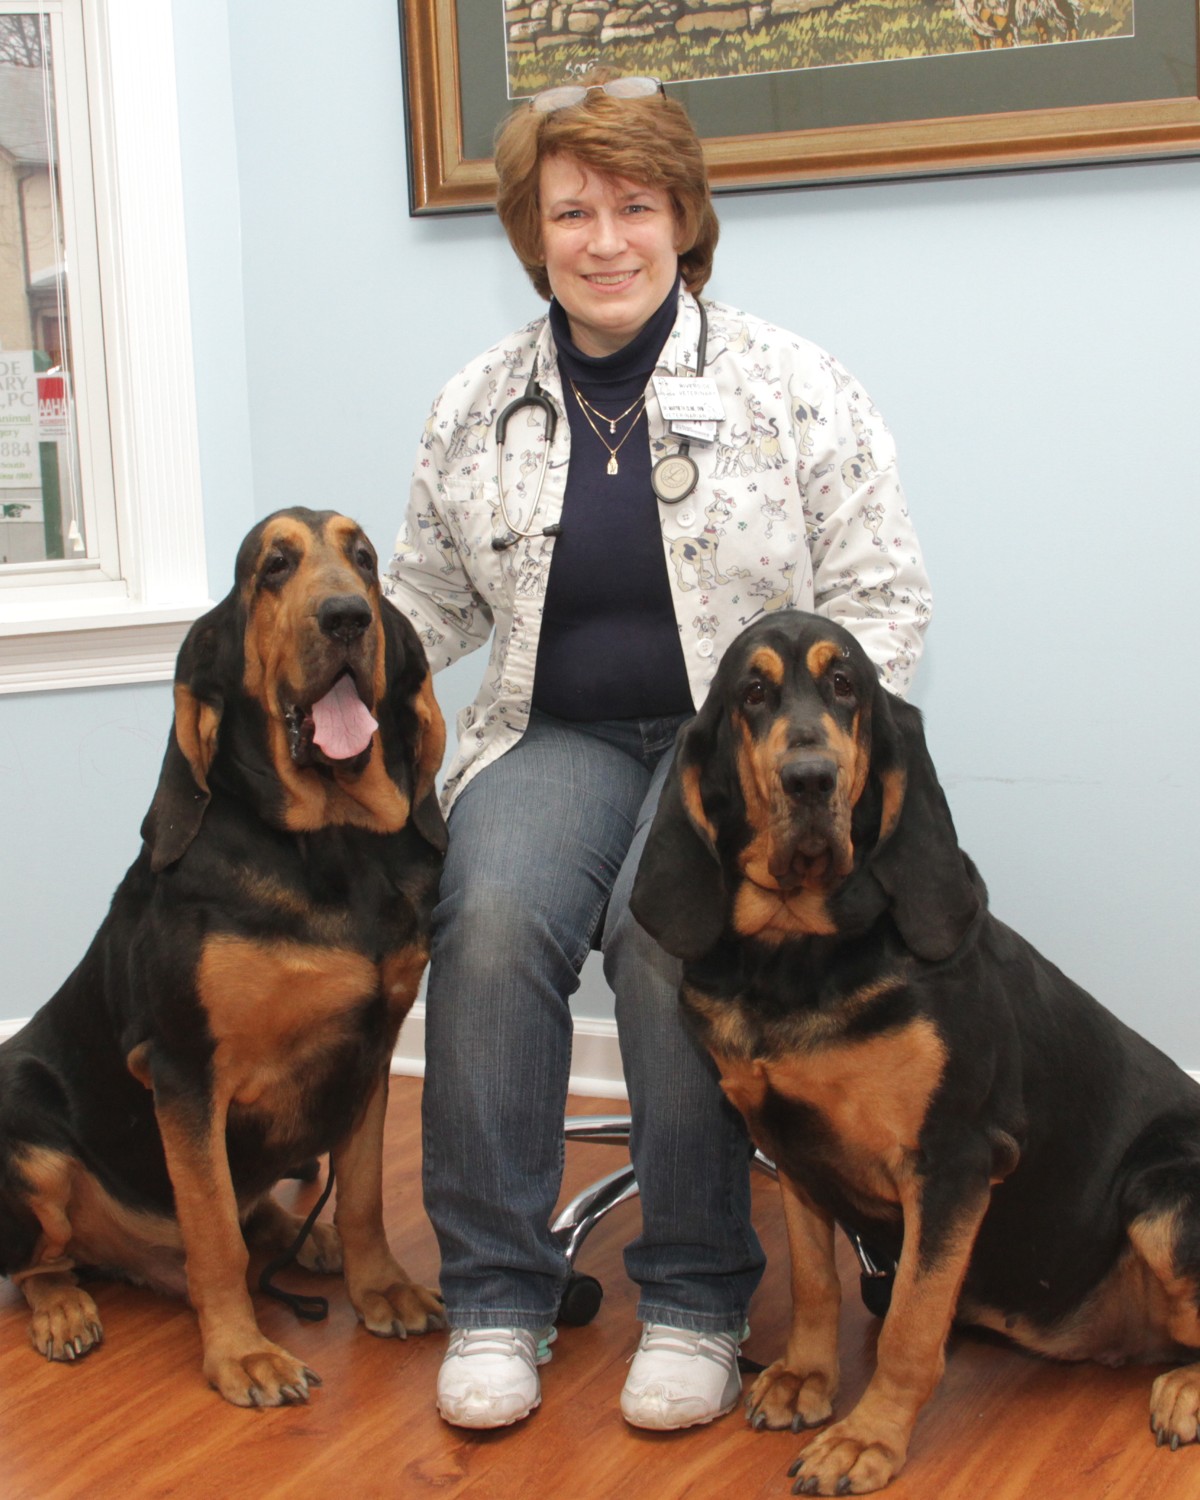 Dr. Marybeth Clinc welcomes you to Riverside Vet!